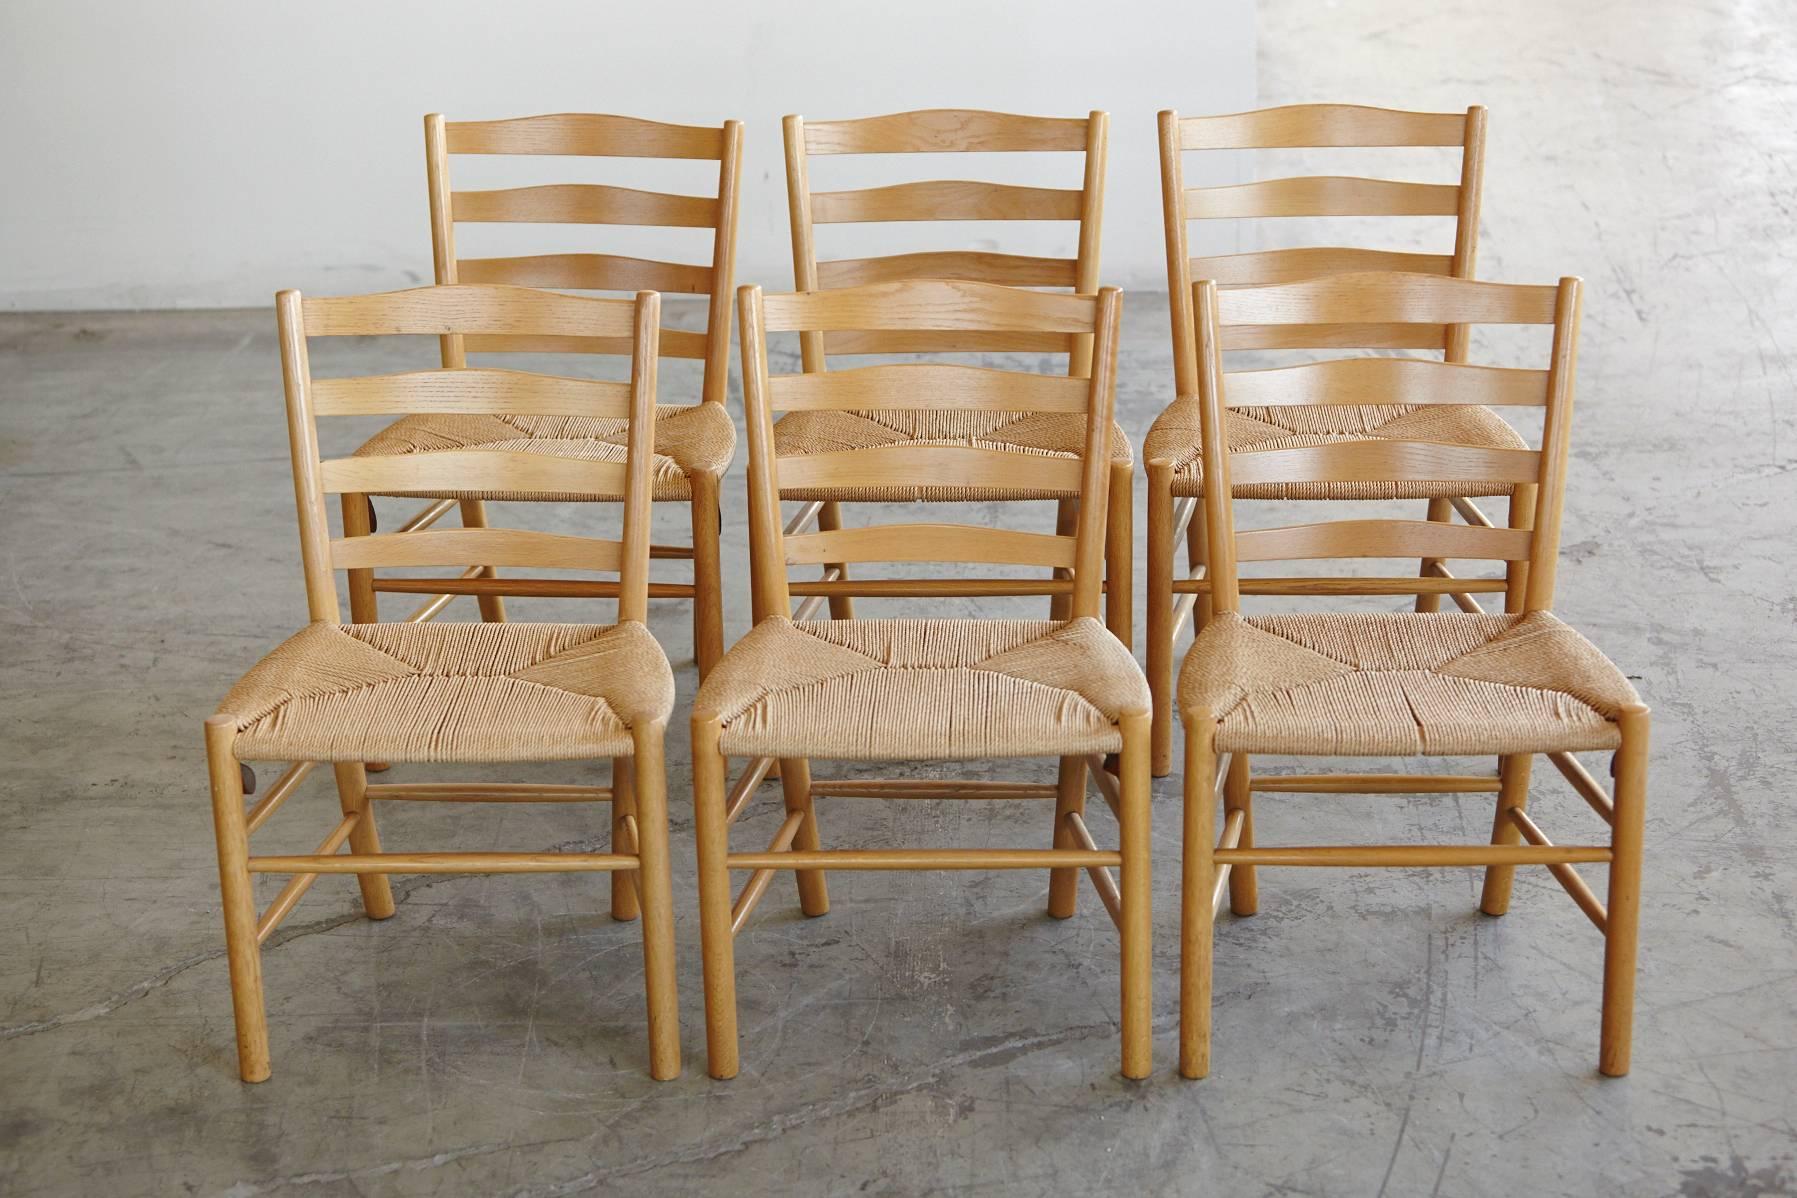 We offer 88 chairs of the famous 